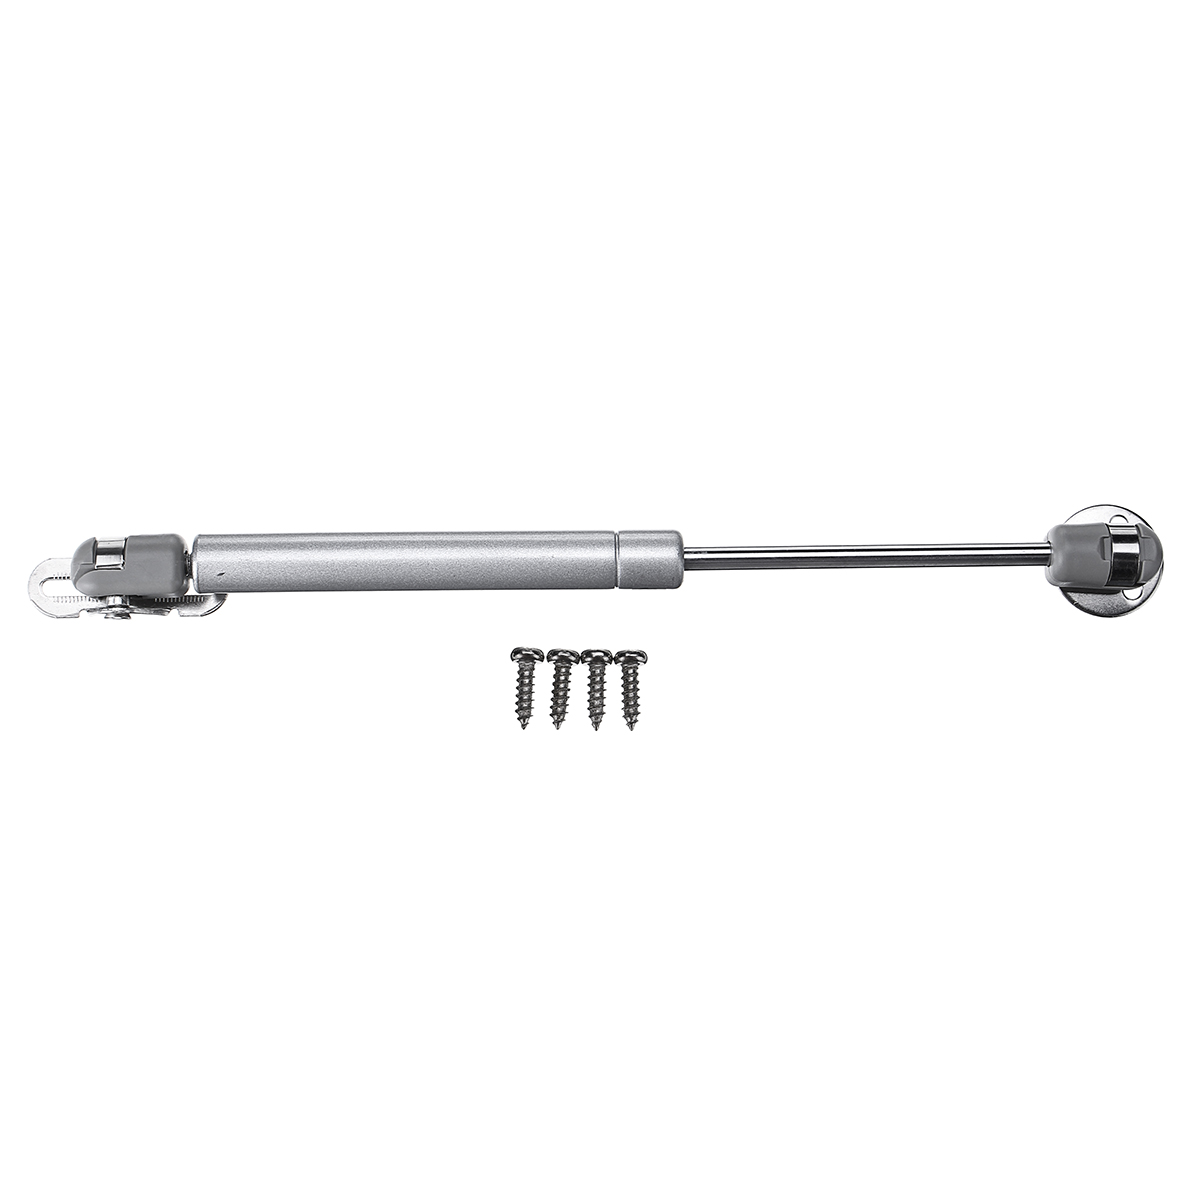 Hydraulic-Support-Rod-Gas-Strut-Lift-Door-Hinges-Levers-Kitchen-Shelf-Furniture-Support-1543869-7